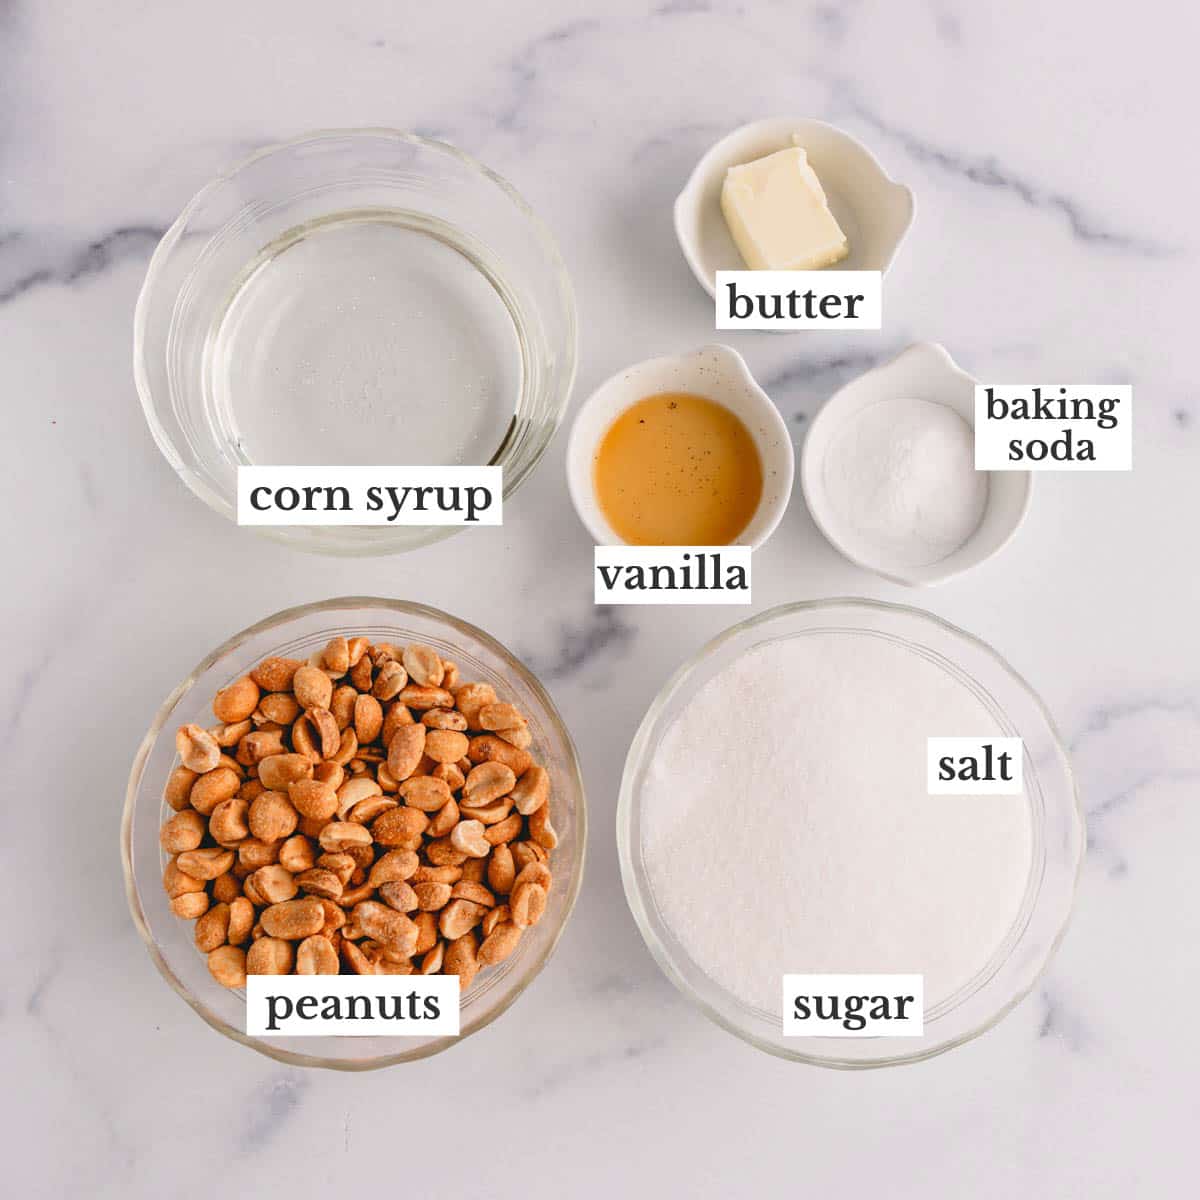 Ingredients to make homemade microwave peanut brittle.